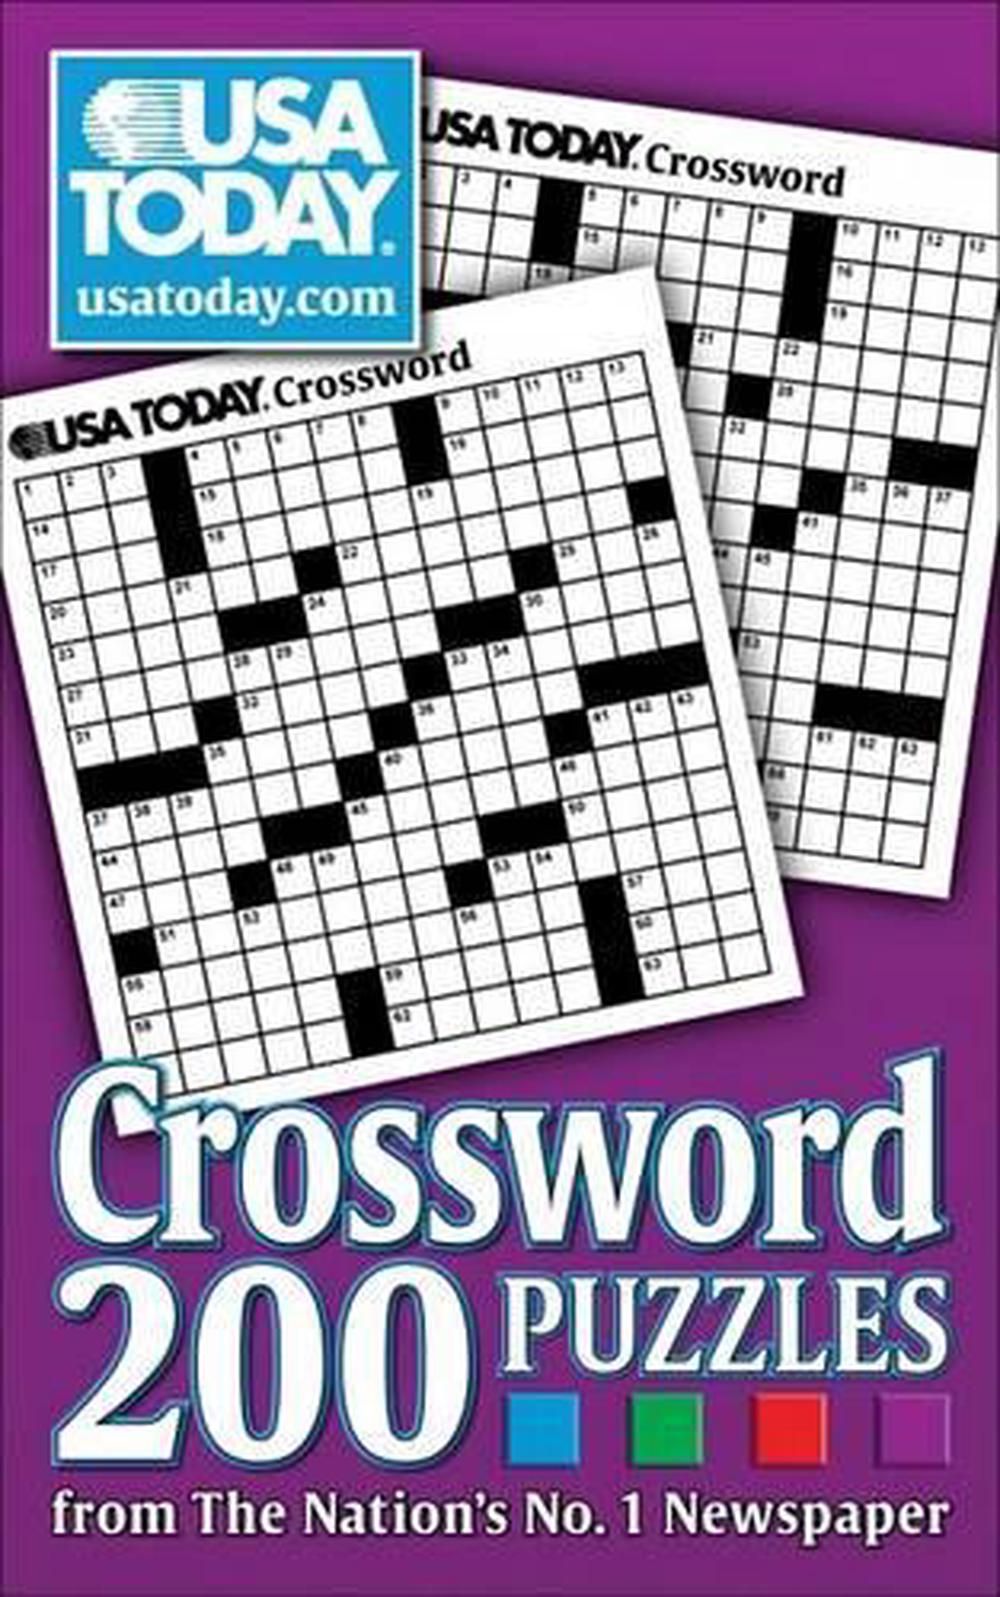 printable-newspaper-crossword-puzzles-for-free-printable-usa-today